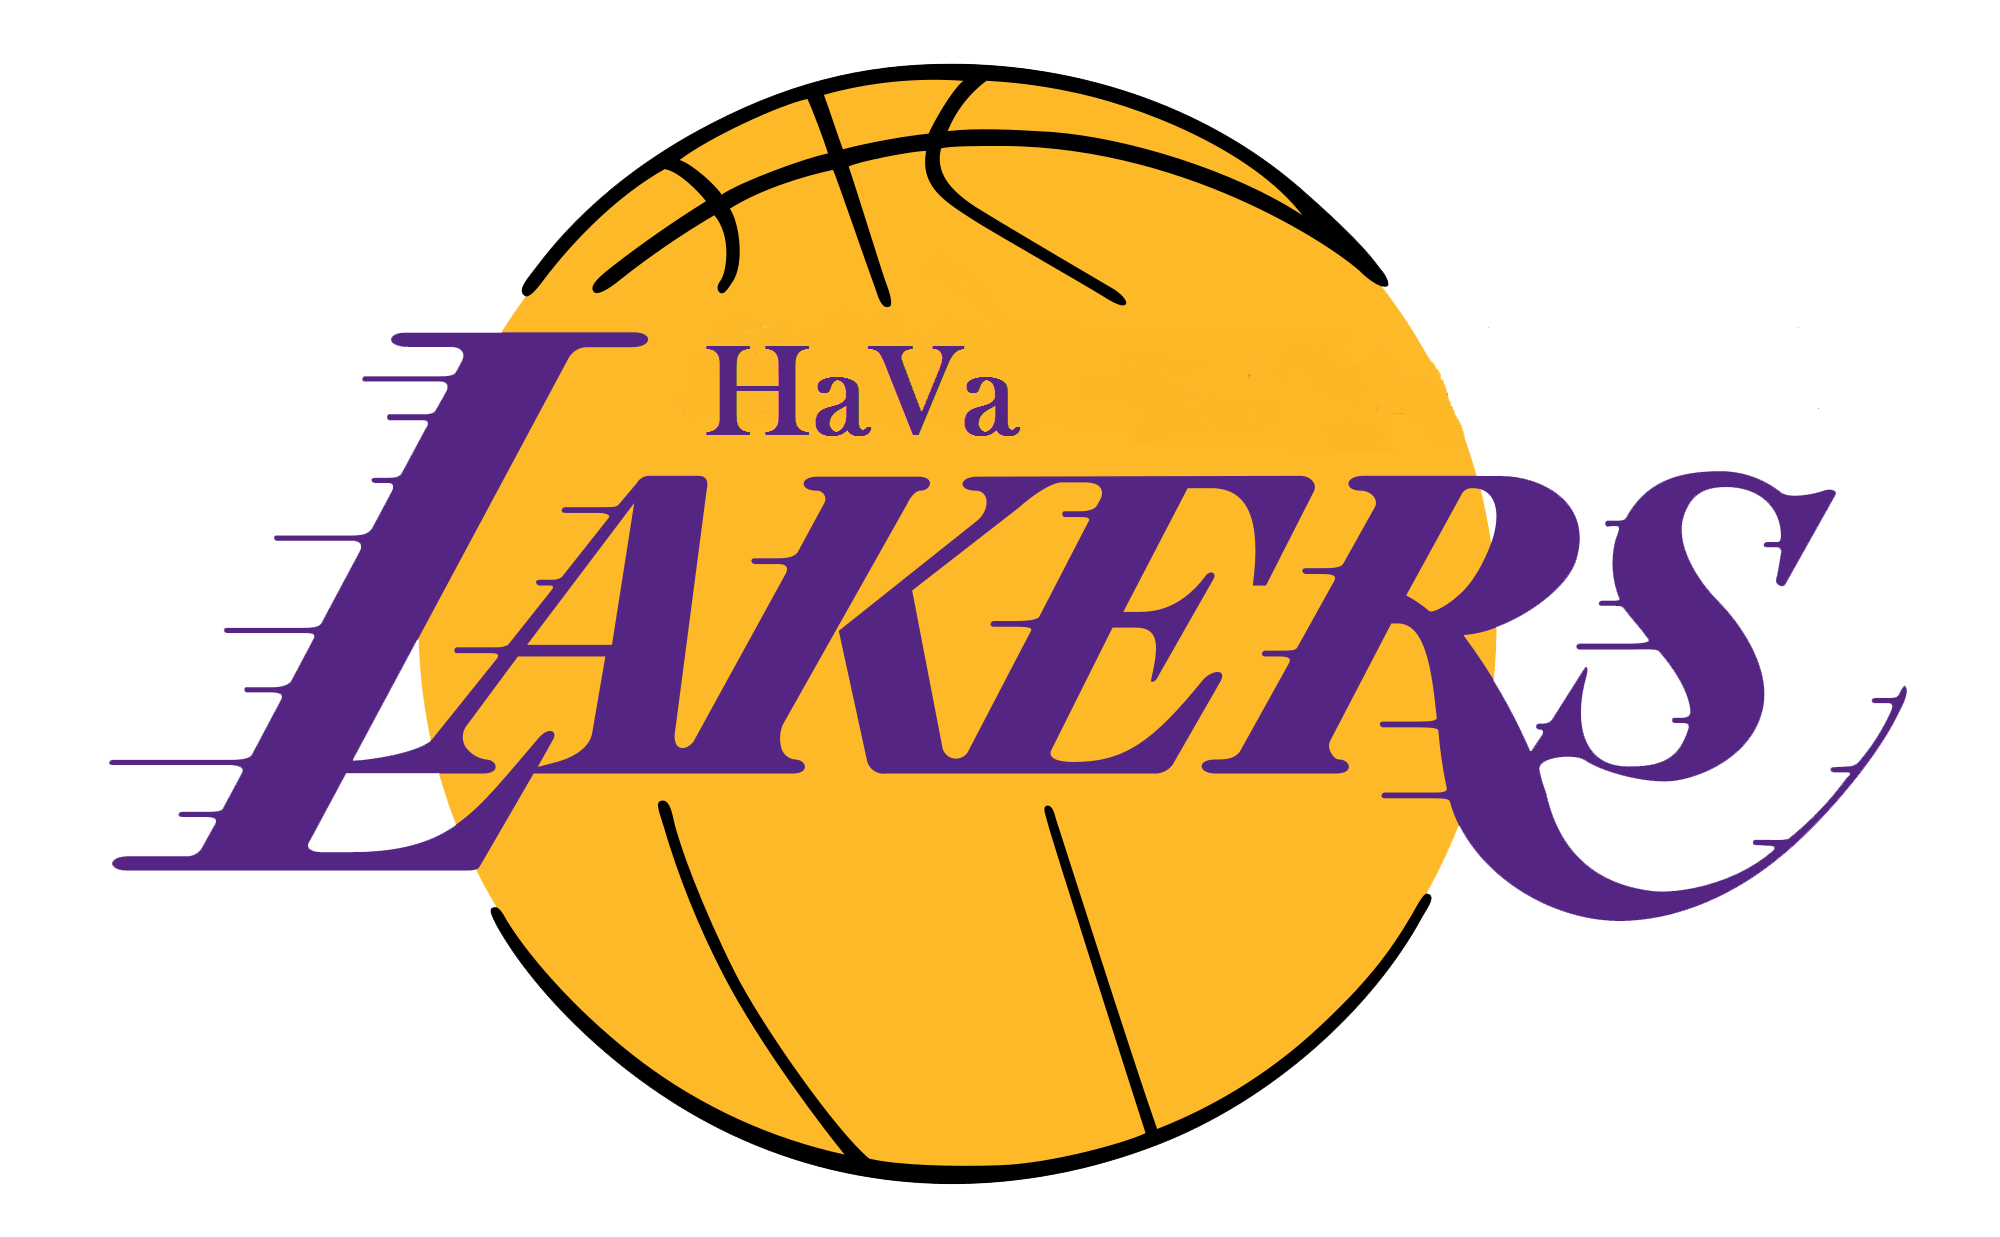 HAVALAKERS